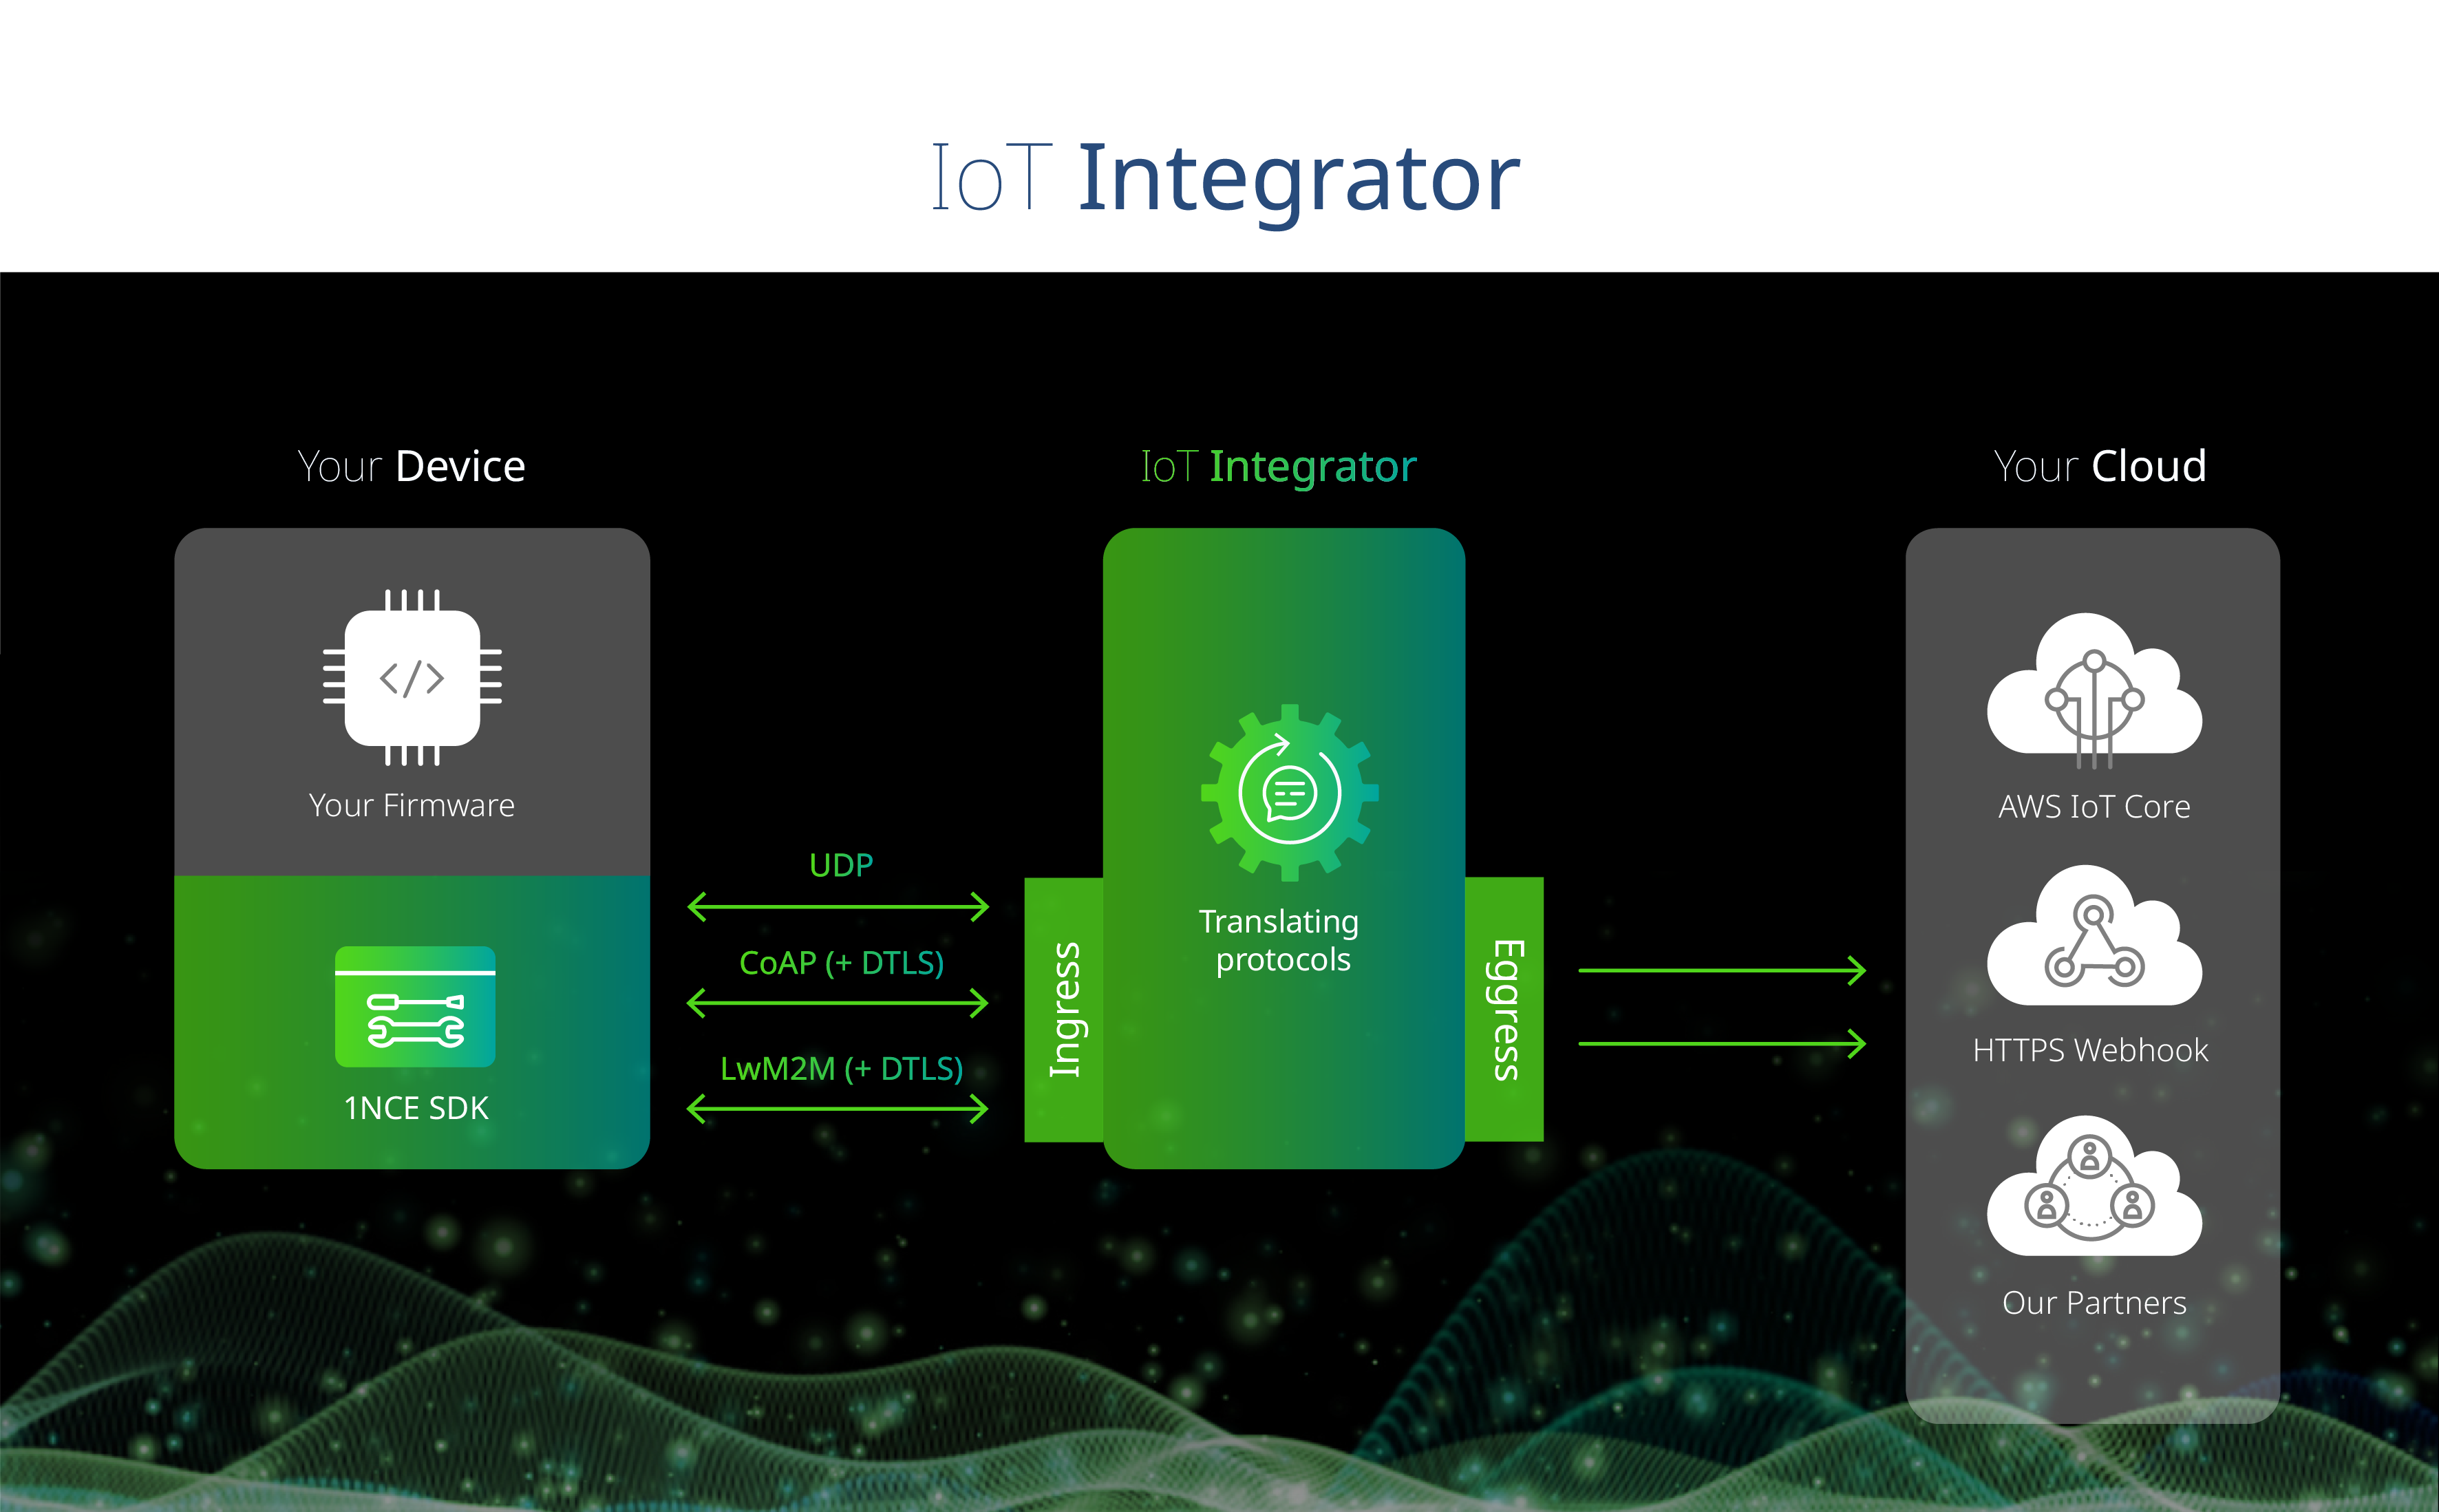 Device Controller as part of the IoT Integrator